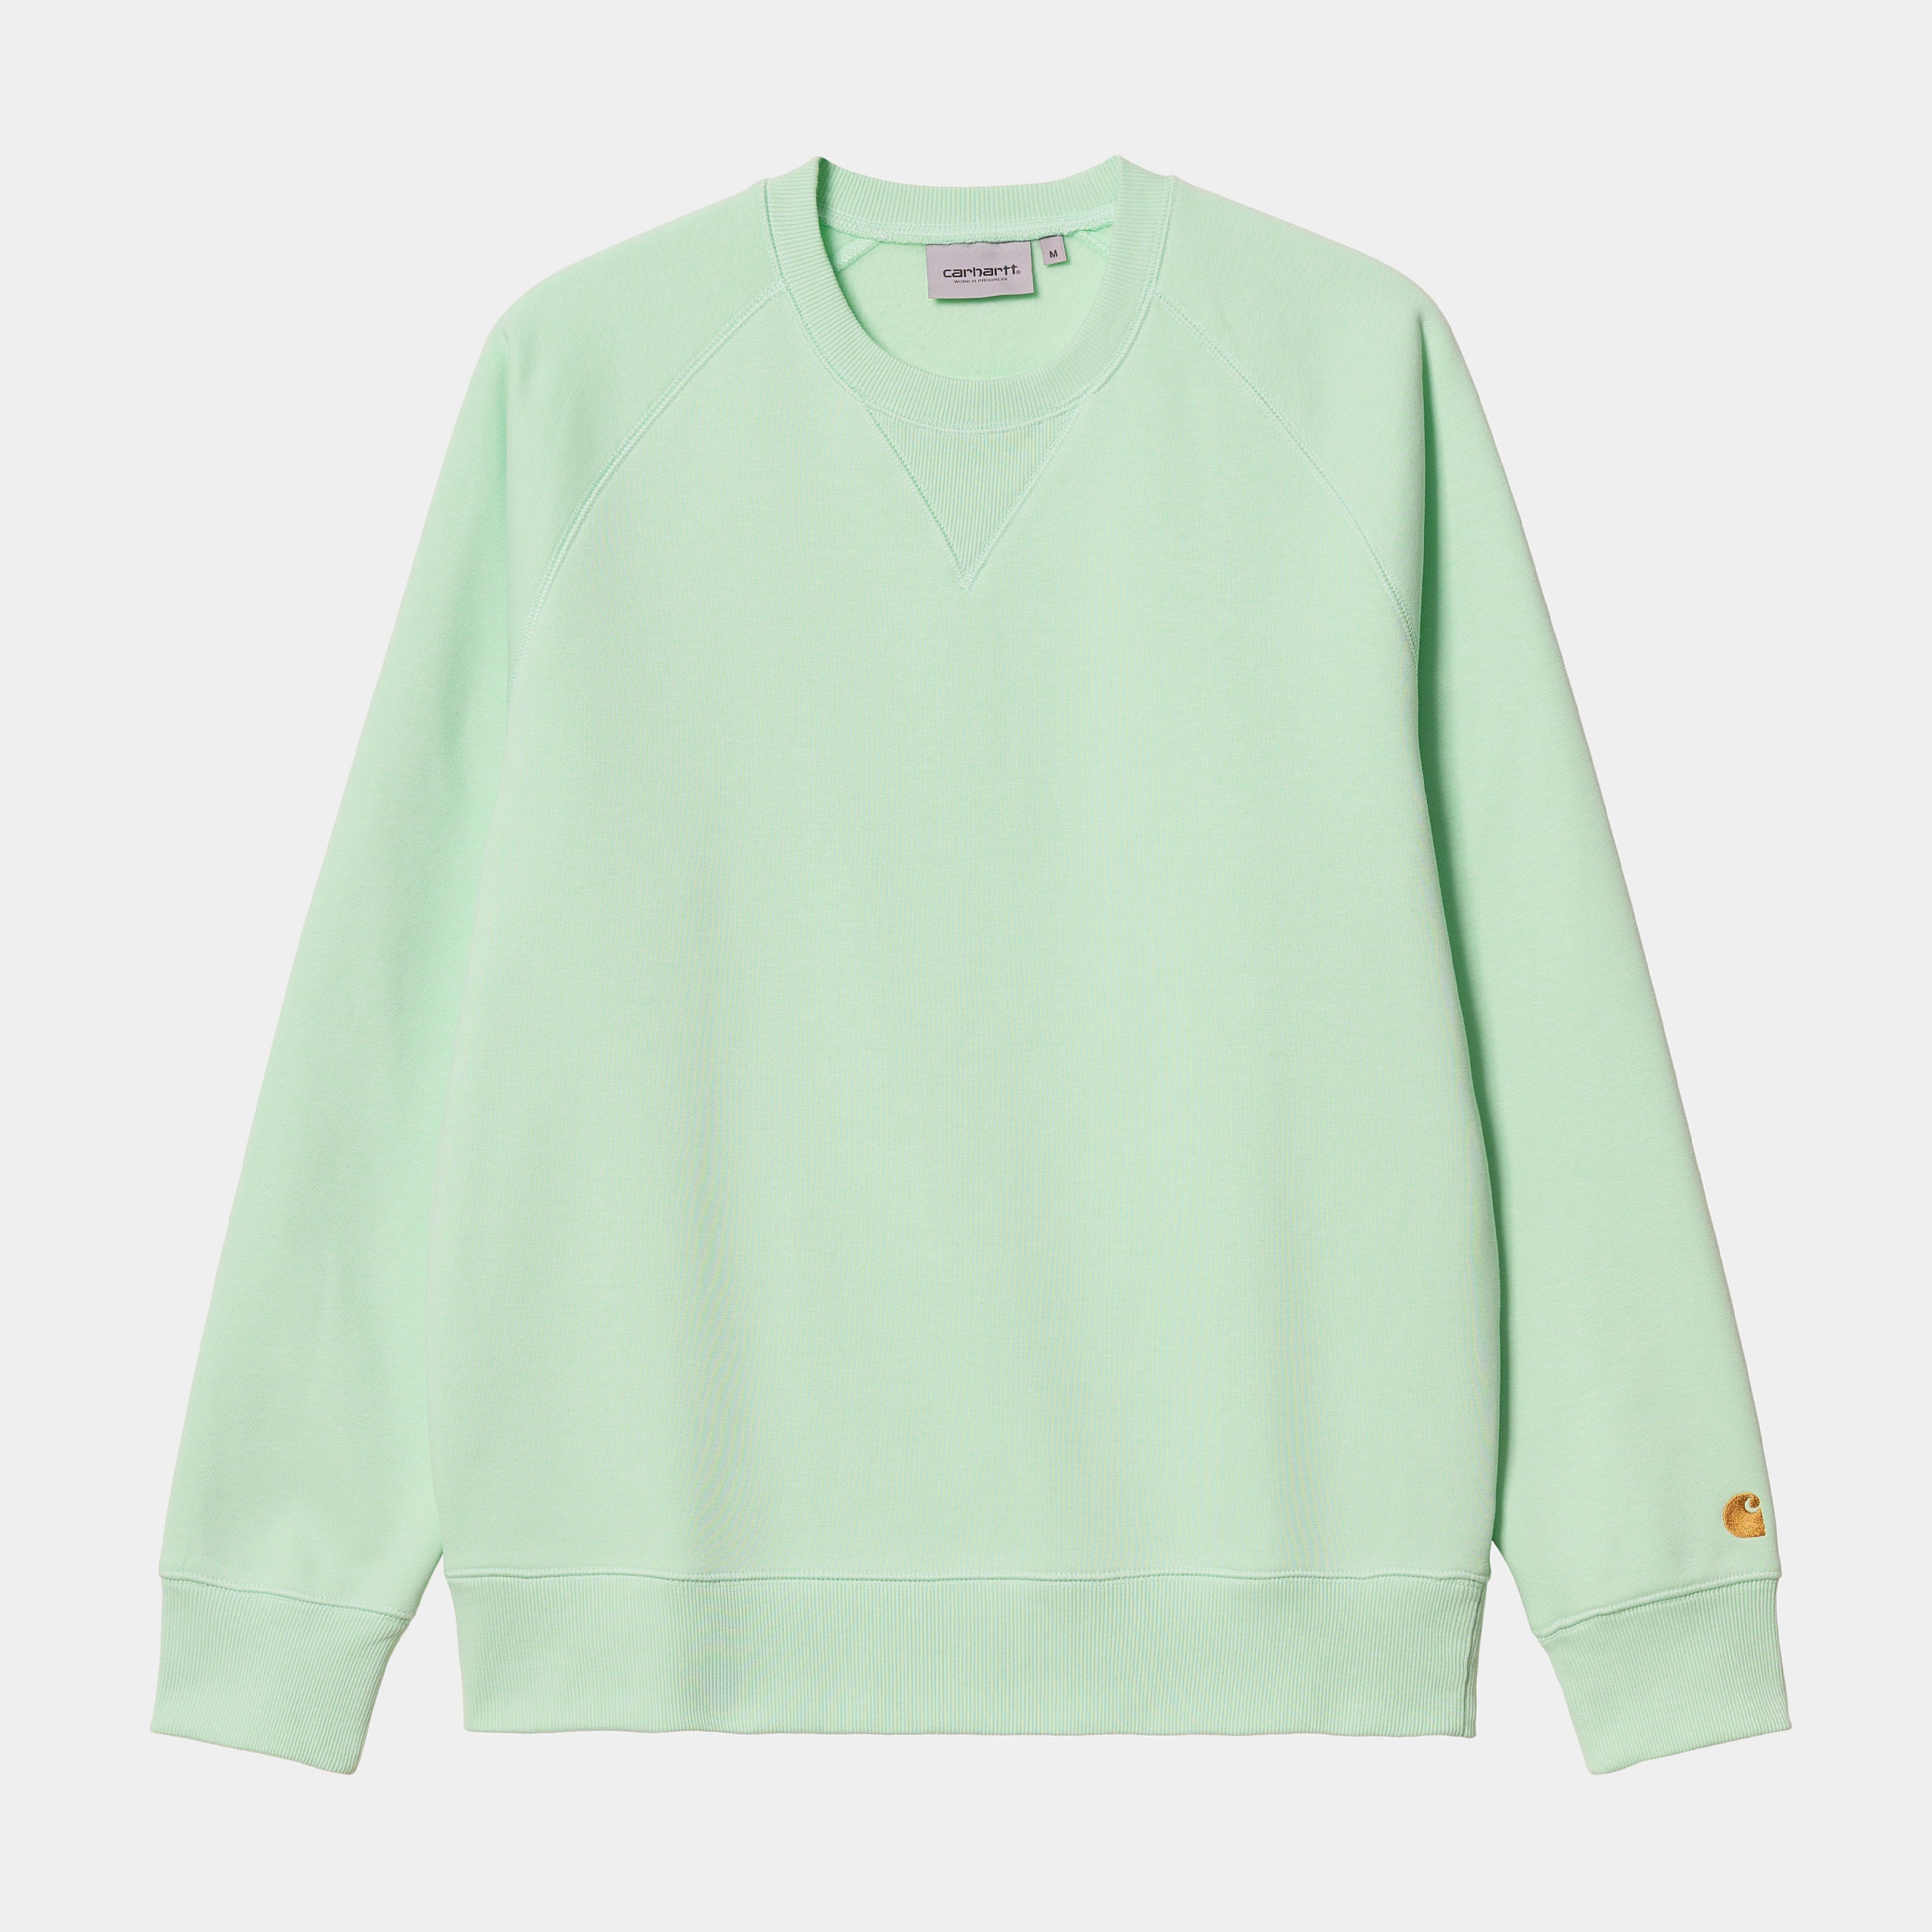 Carhartt Mens Chase Sweat Top - Pale Spearmint / Gold